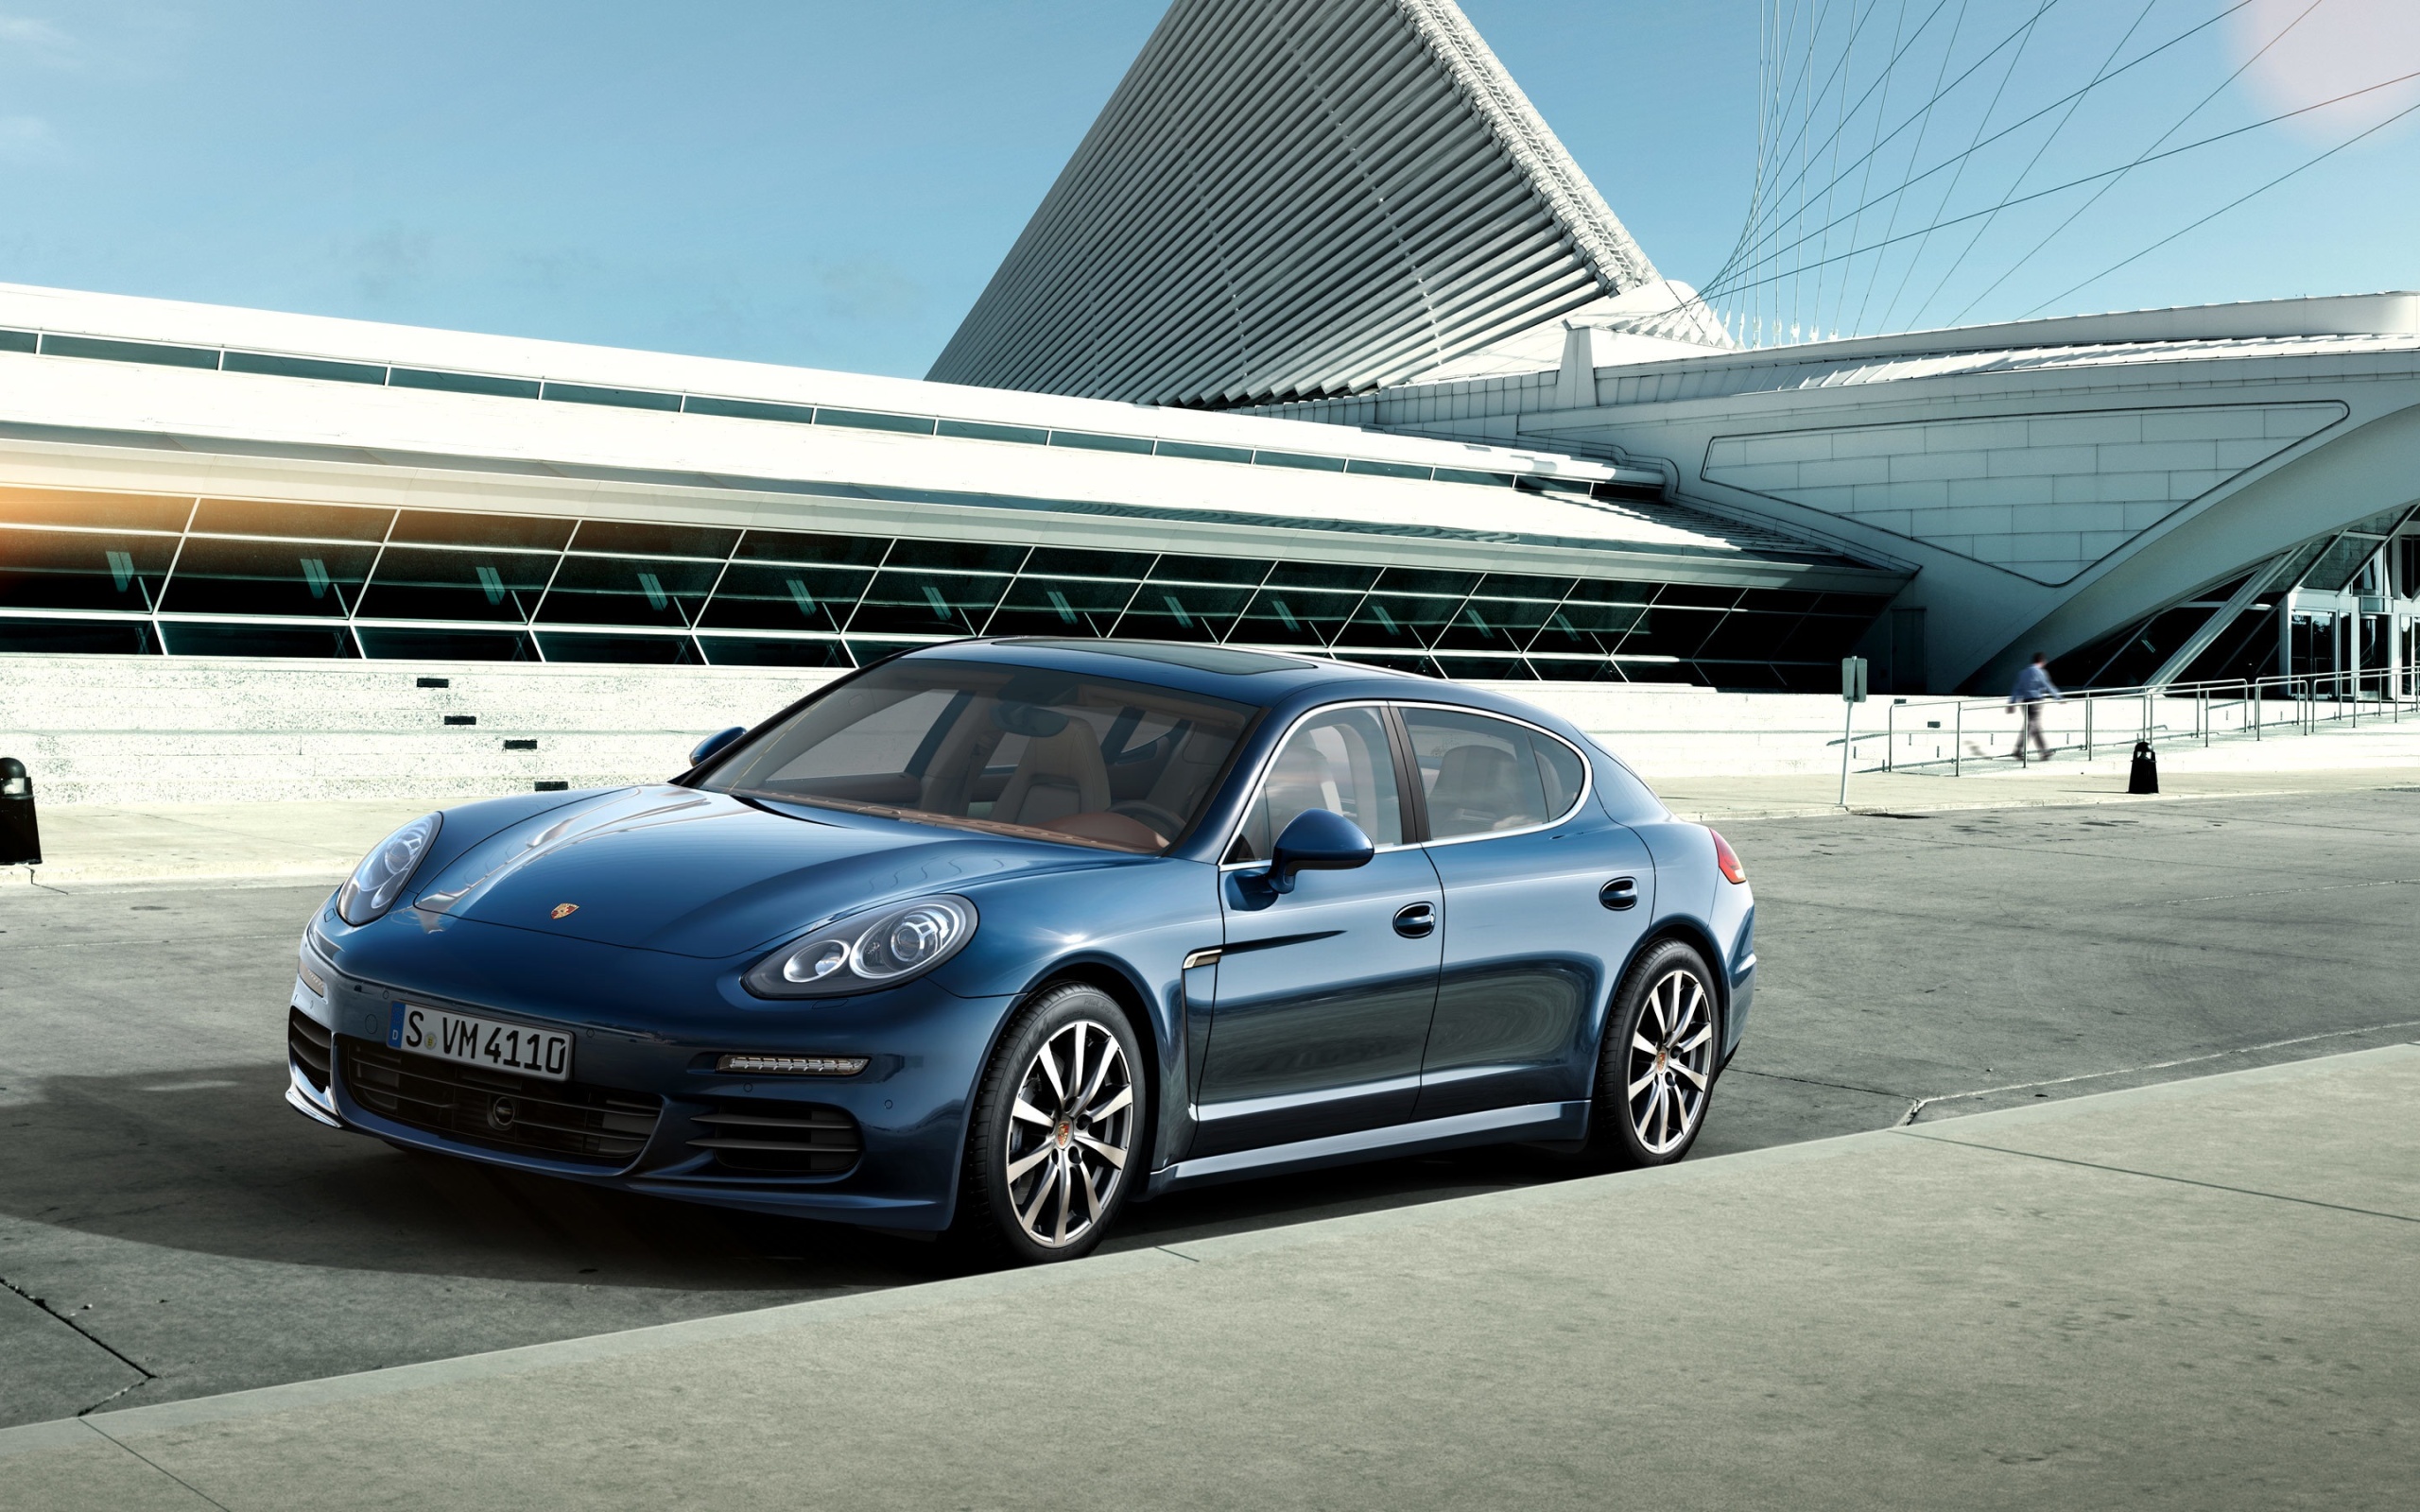 4 - The Least Reliable Cars You Can Buy - Porsche Panamera